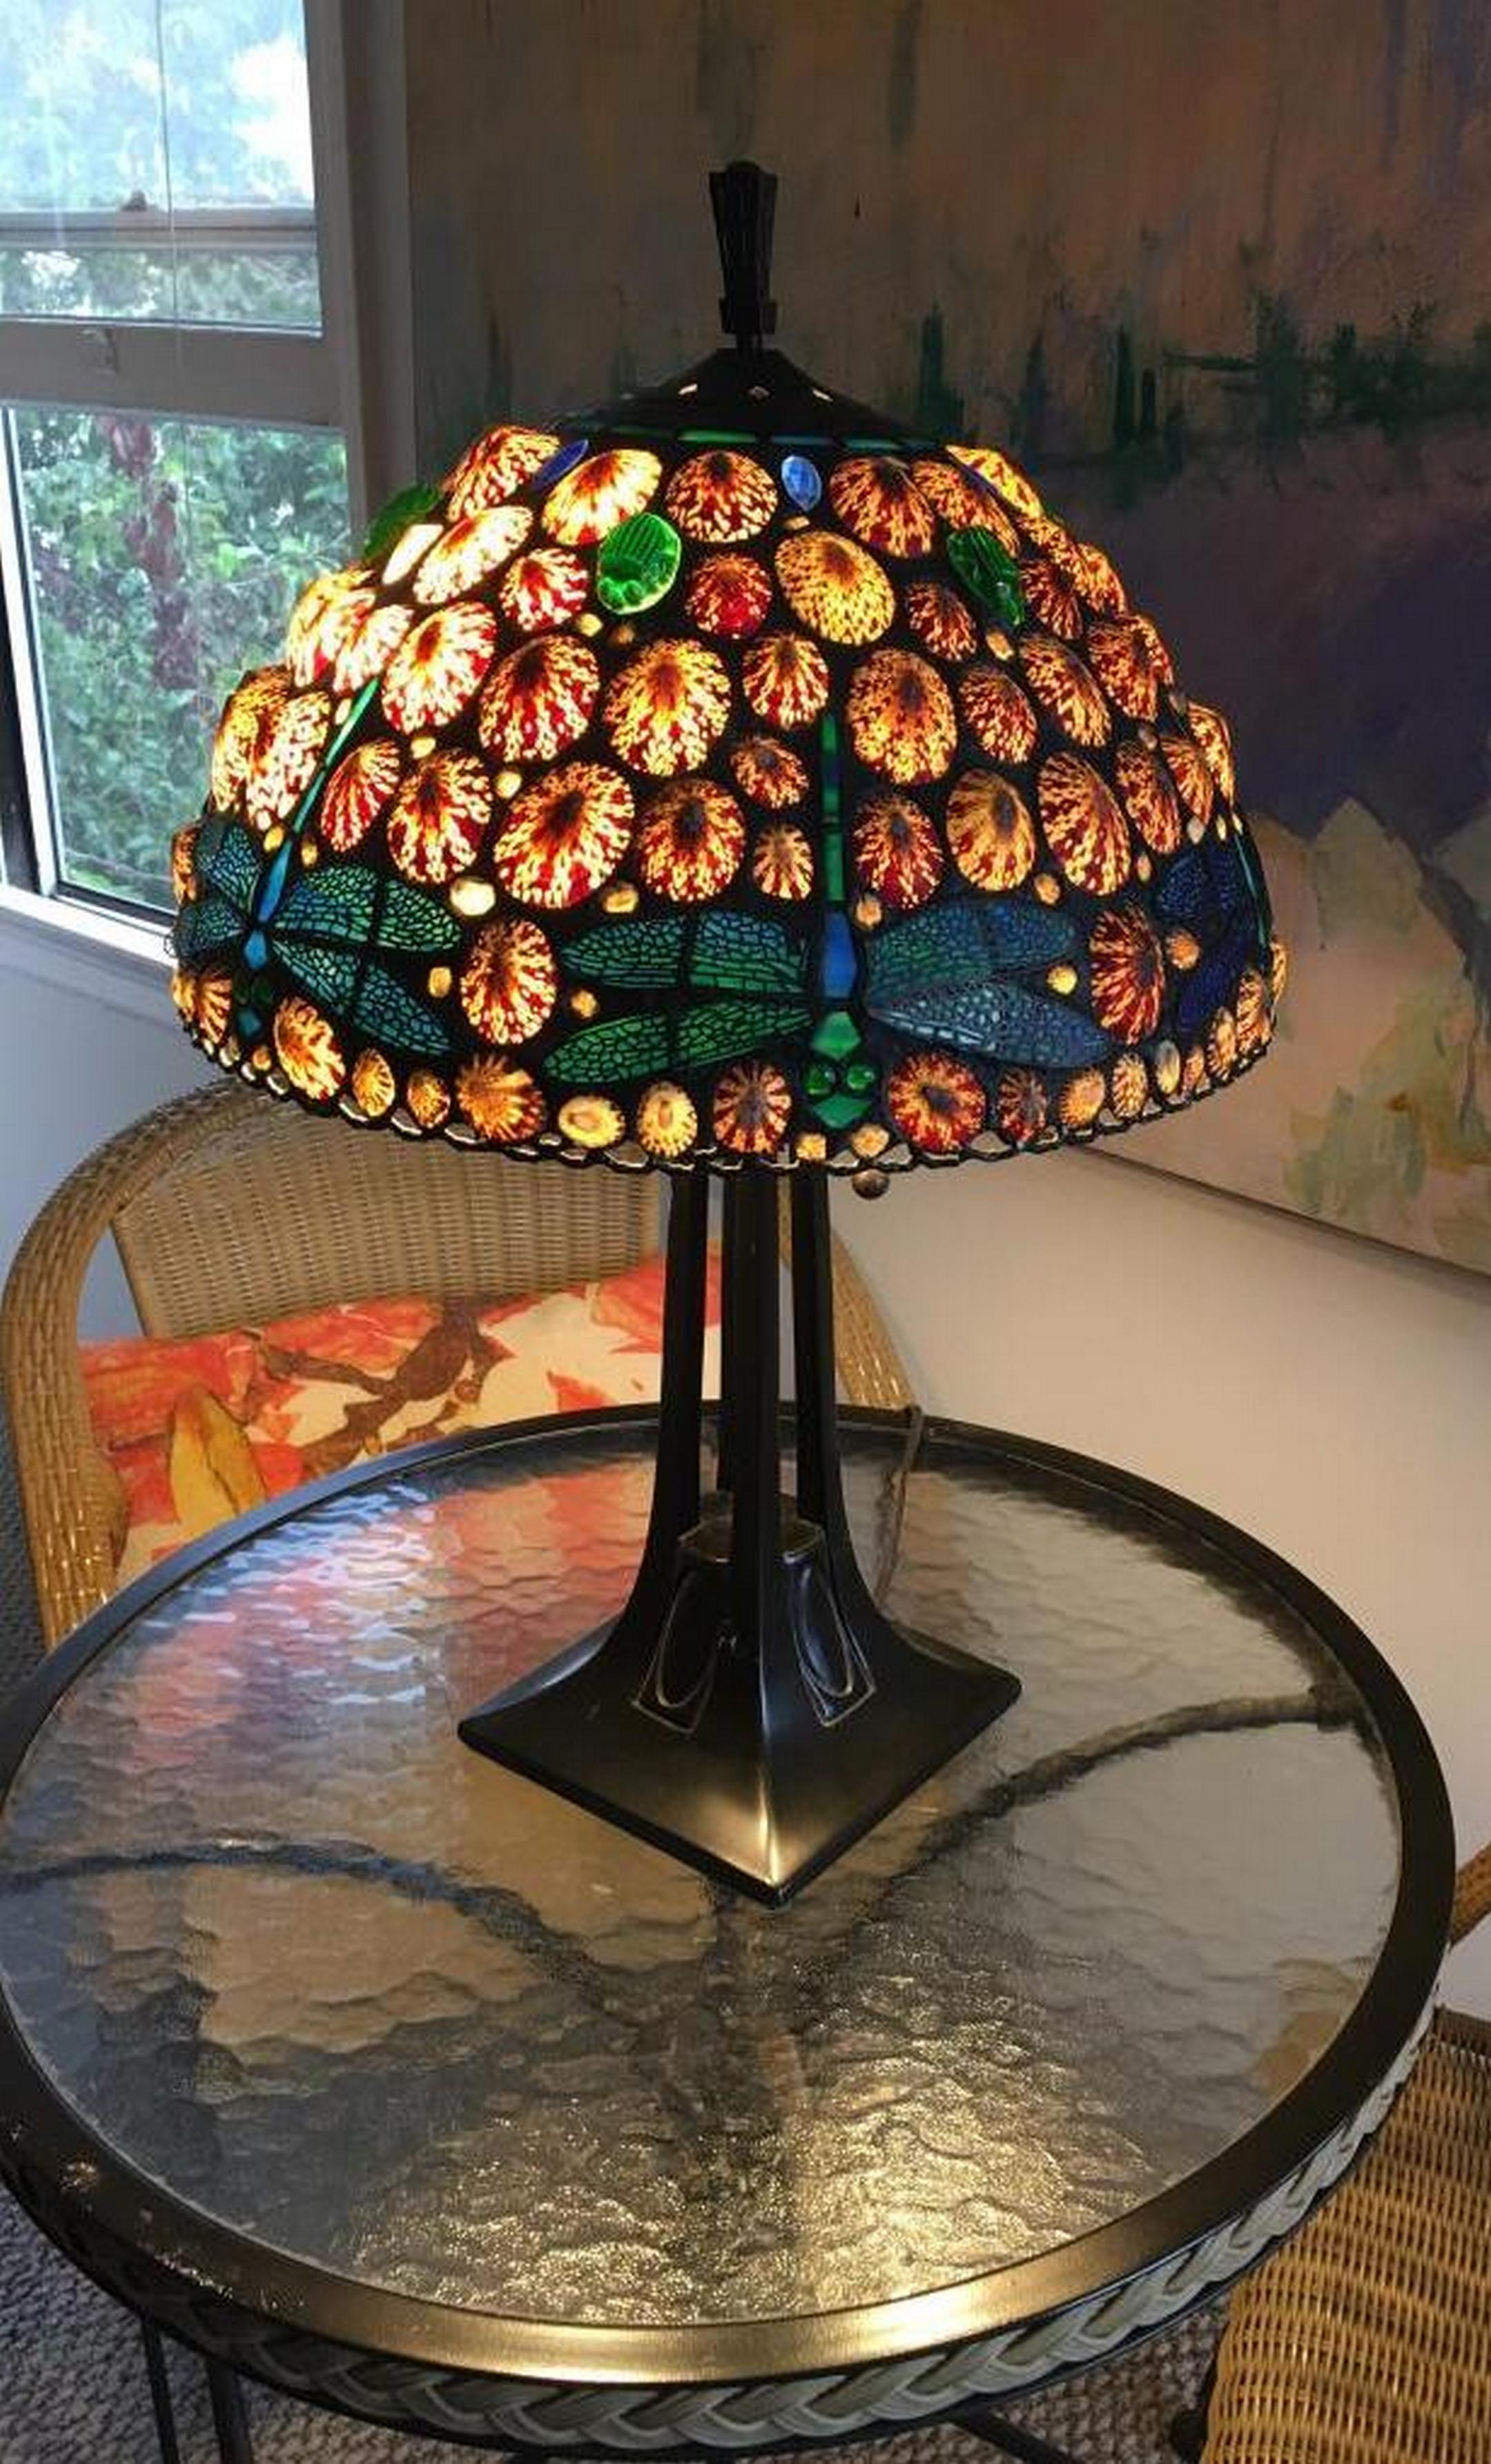 Fascinating lamp made of shells and glass. it is stamped, dated, signed, and numbered.
This lamp was hand-made using the same techniques developed by Louis Tiffany in the early 1900s.
Hoosin combines shells and transparent colorful glass. The